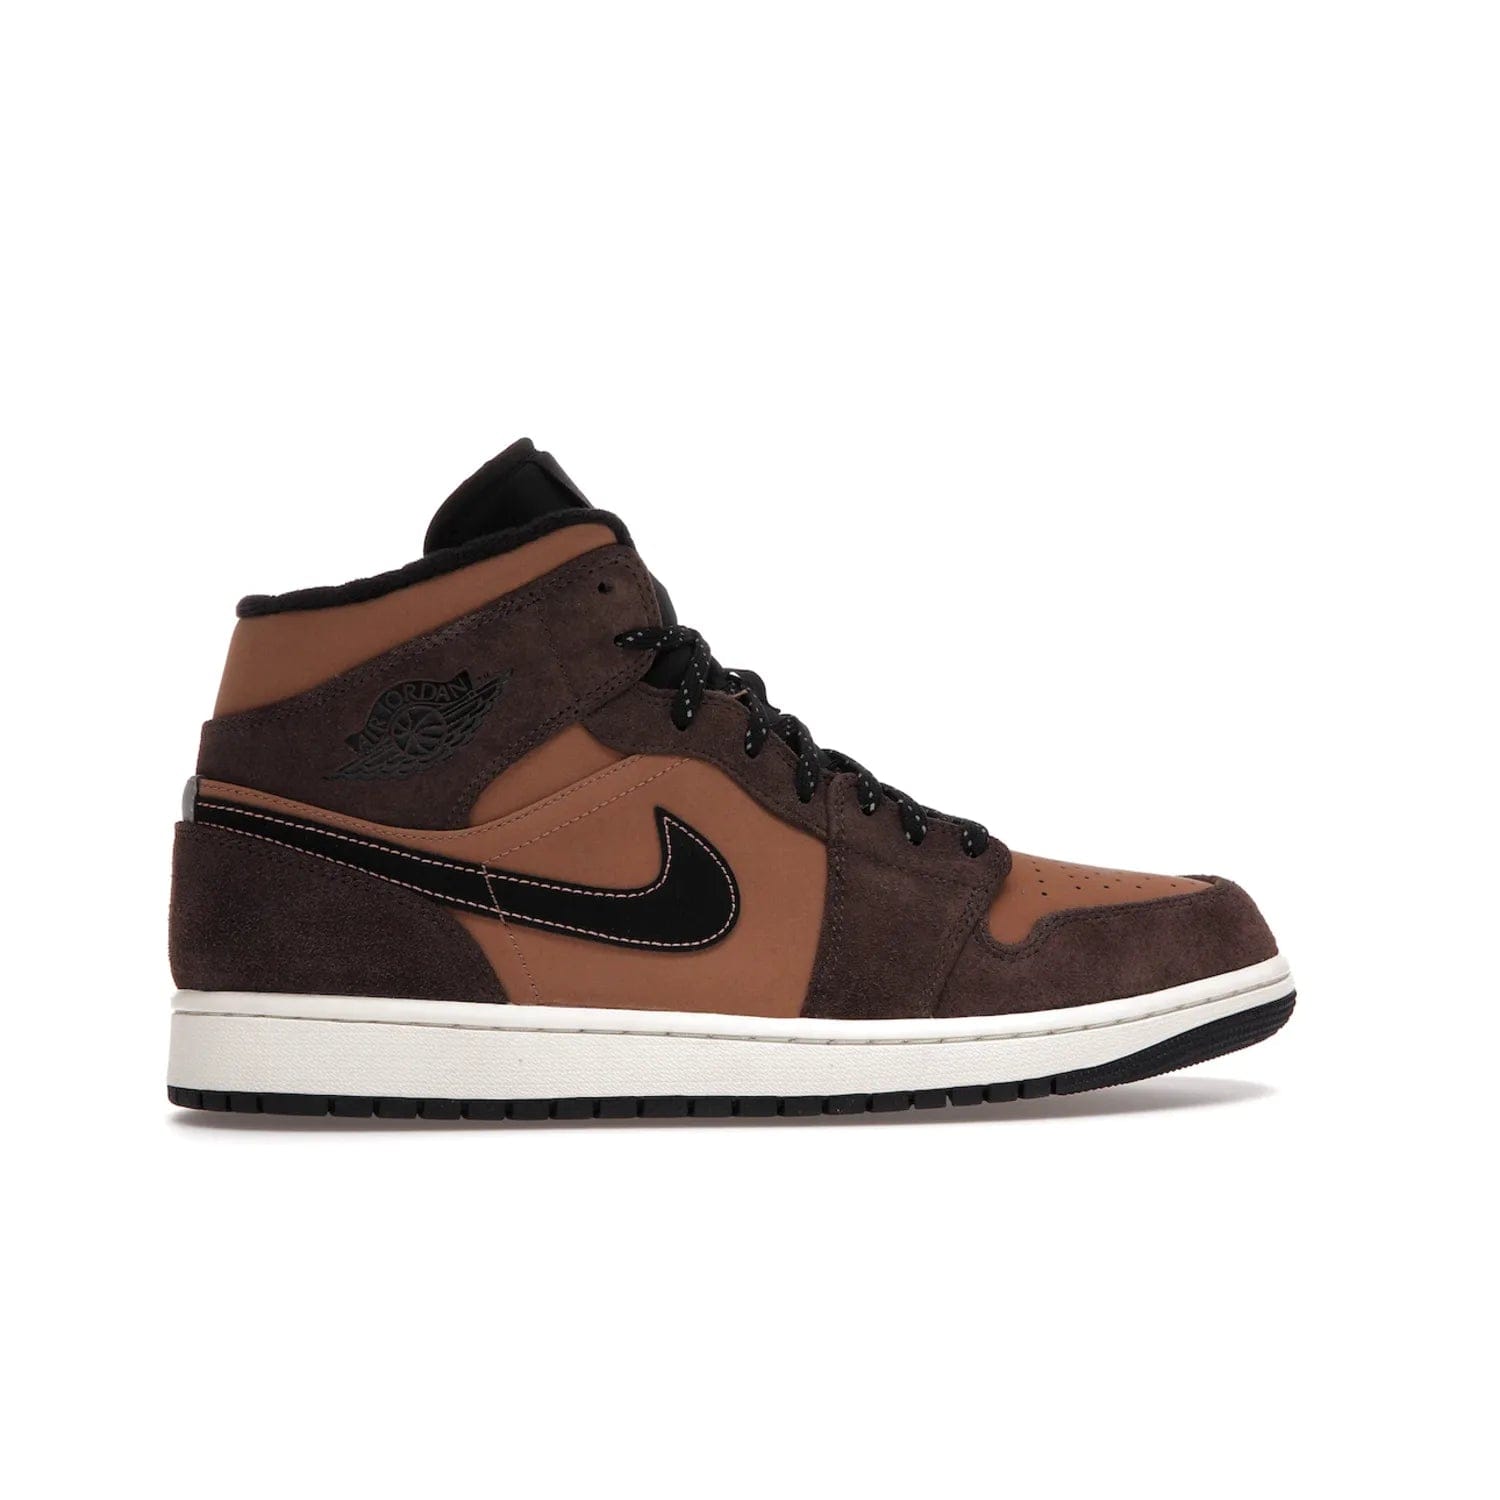 Jordan 1 Mid SE Dark Chocolate - Image 36 - Only at www.BallersClubKickz.com - This fashionable and functional Jordan 1 Mid SE Dark Chocolate features a light brown Durabuck upper, dark brown suede overlays, black Swoosh logos and reflective patch at heel. A must-have for any sneakerhead!